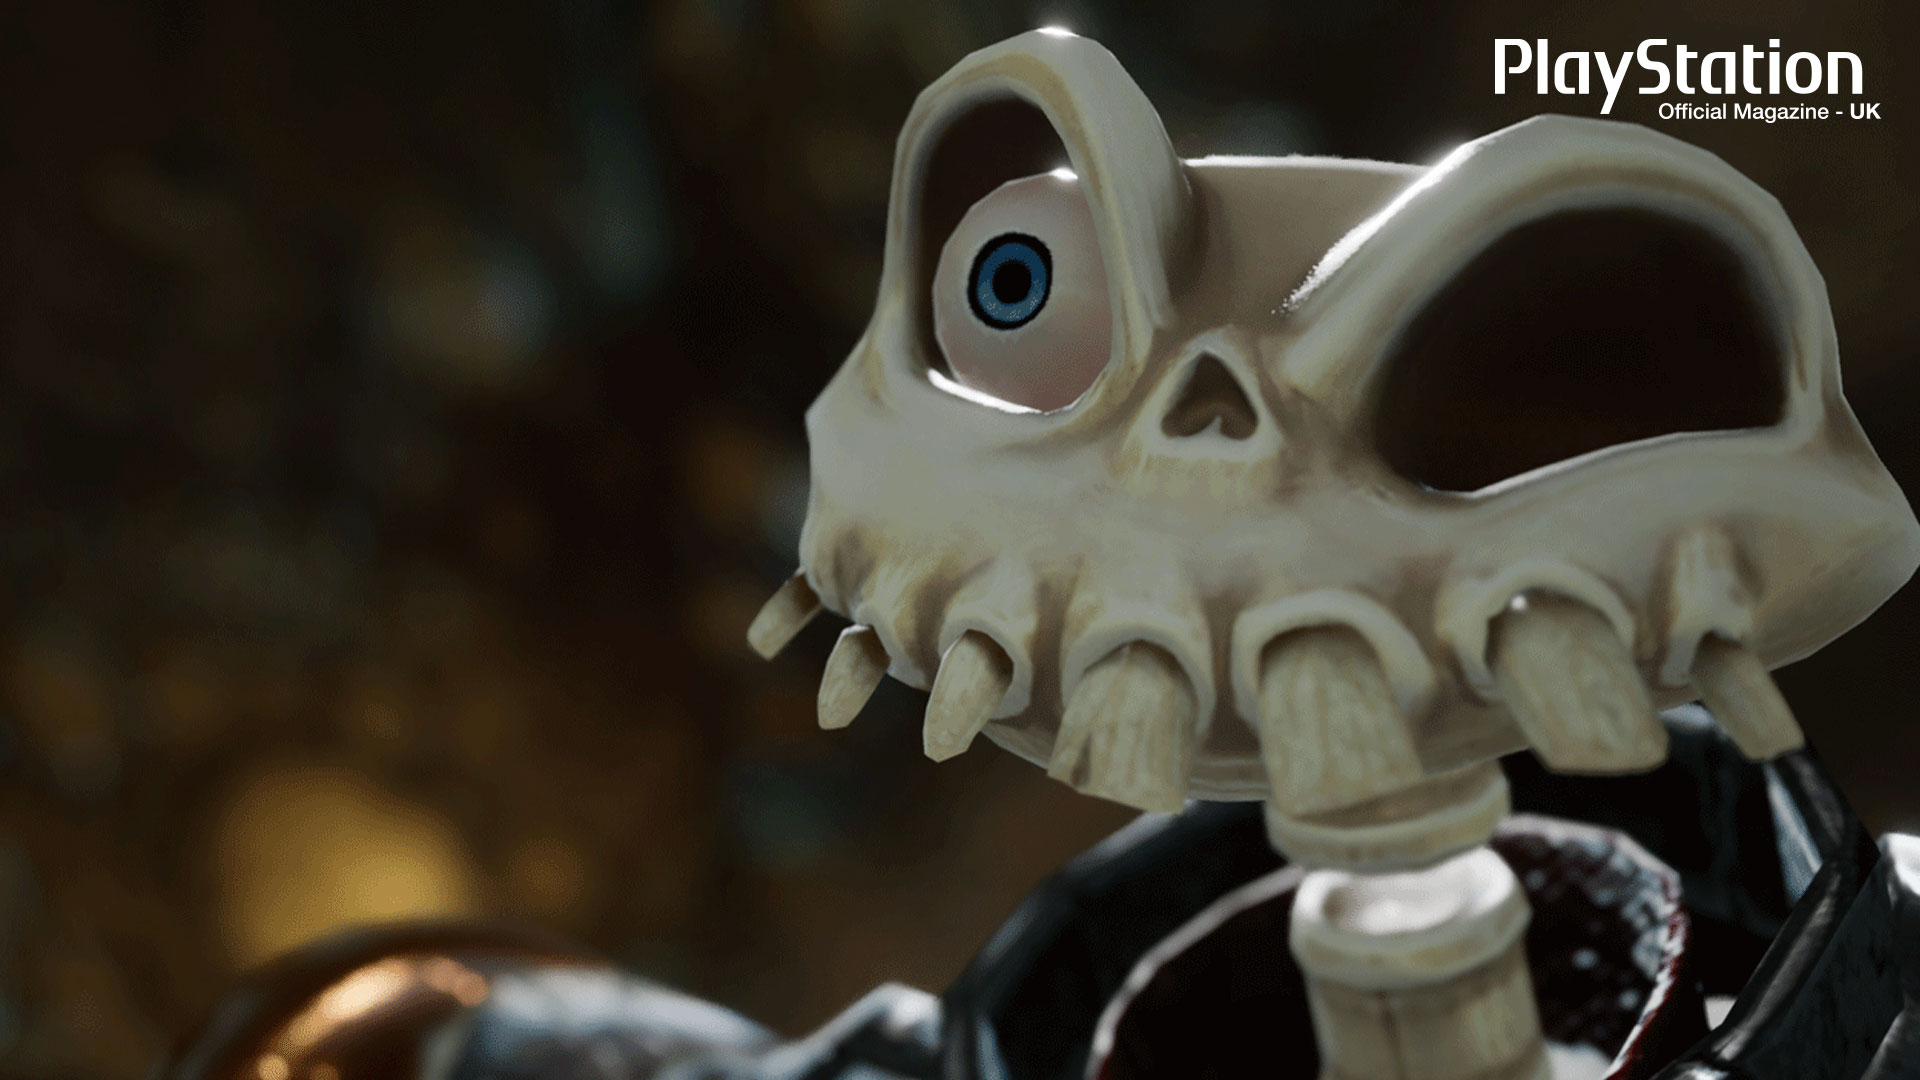 MediEvil isn’t designed to be “an exact replica” of the PS1 cult-classic, and it’s all the better because of it